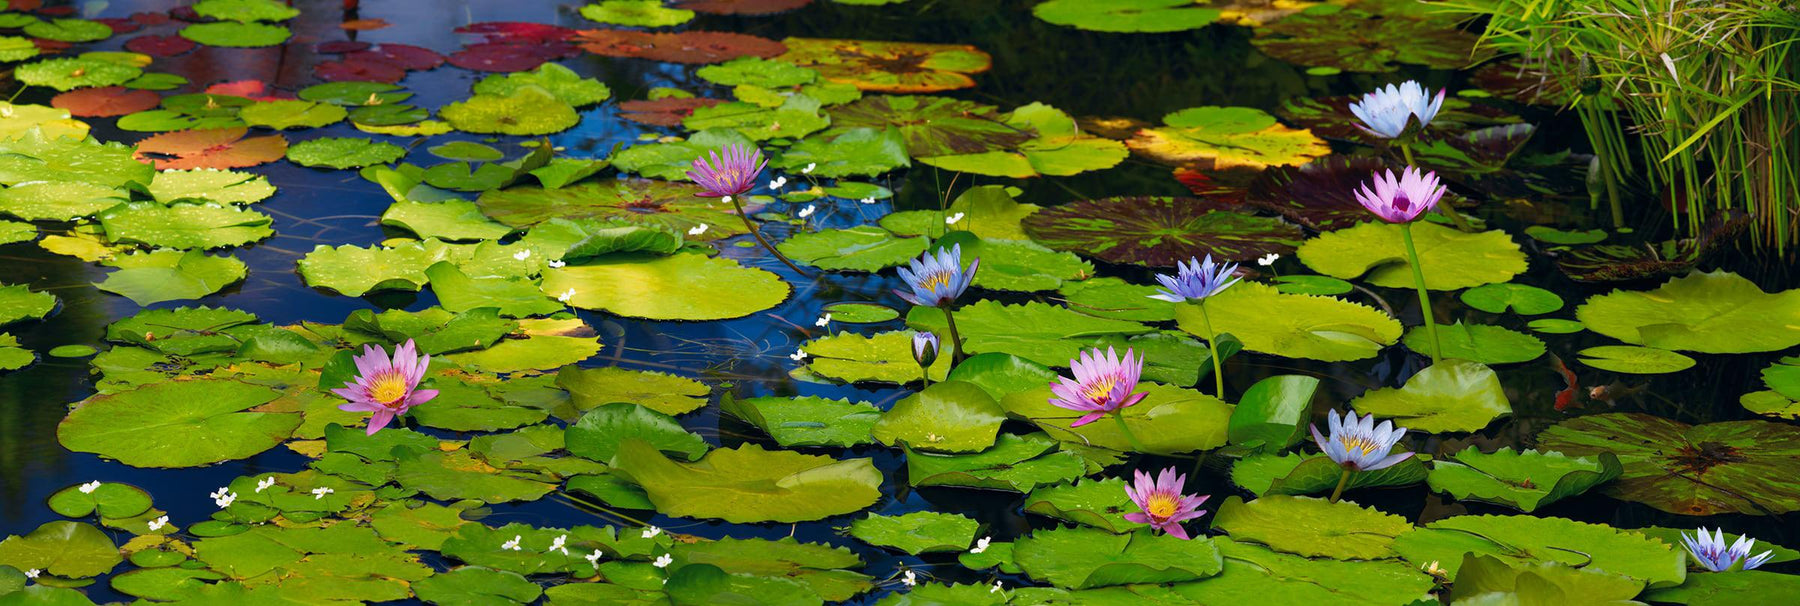 Pond filled with lily pads and pink and purple lilies in Maui Hawaii